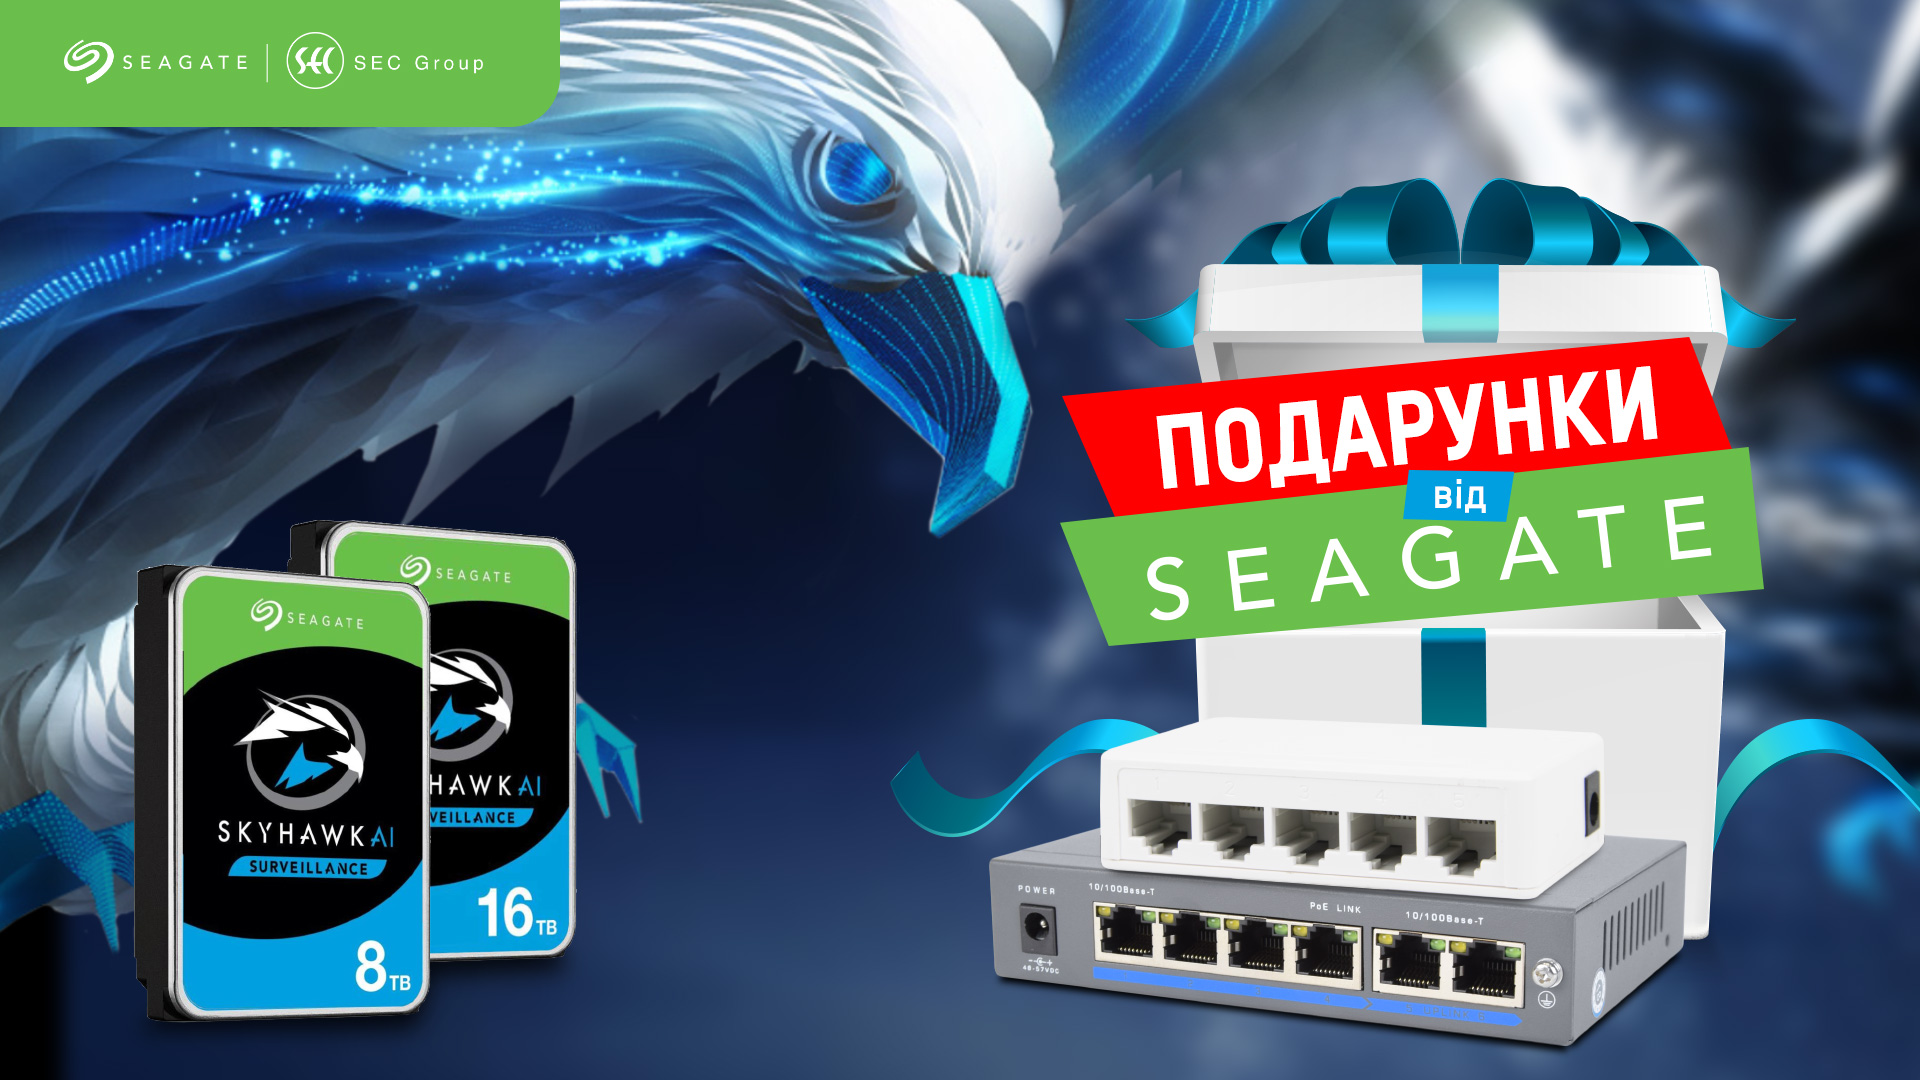 seagate sec group giveaway